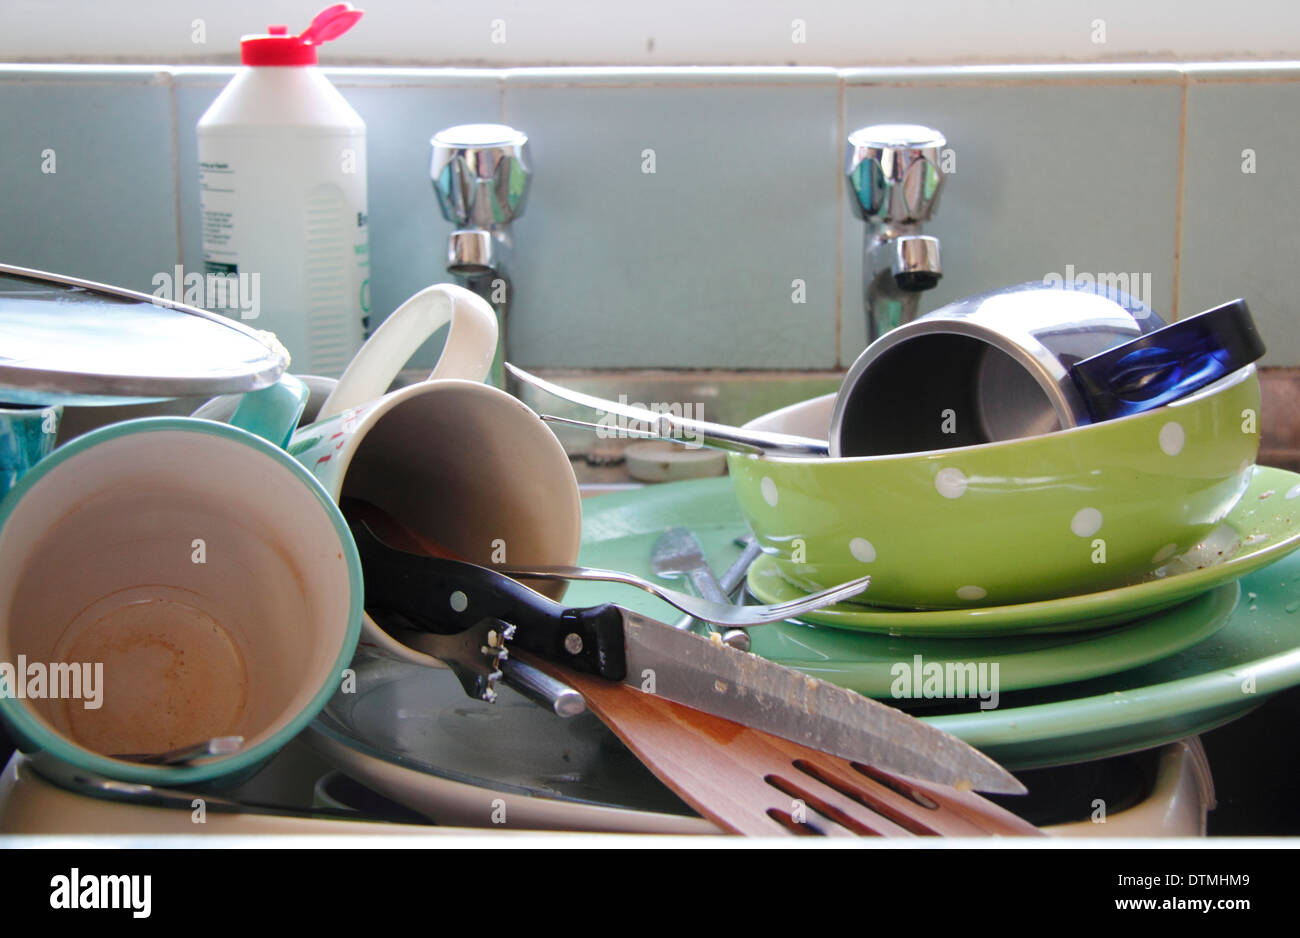 Dirty Pots Pans High Resolution Stock Photography and Images - Alamy